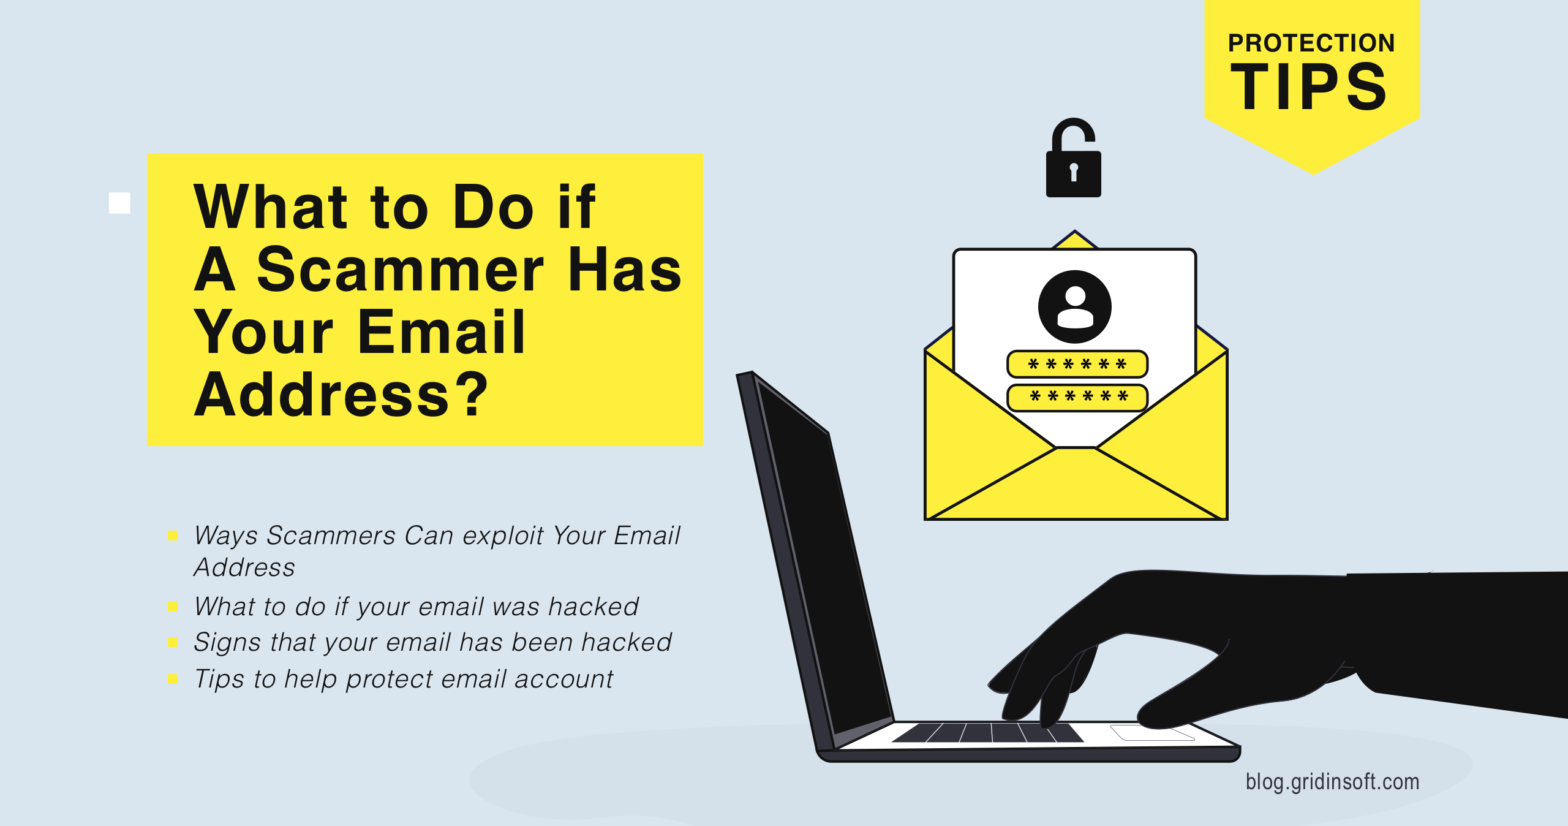 Can hackers steal your email address?